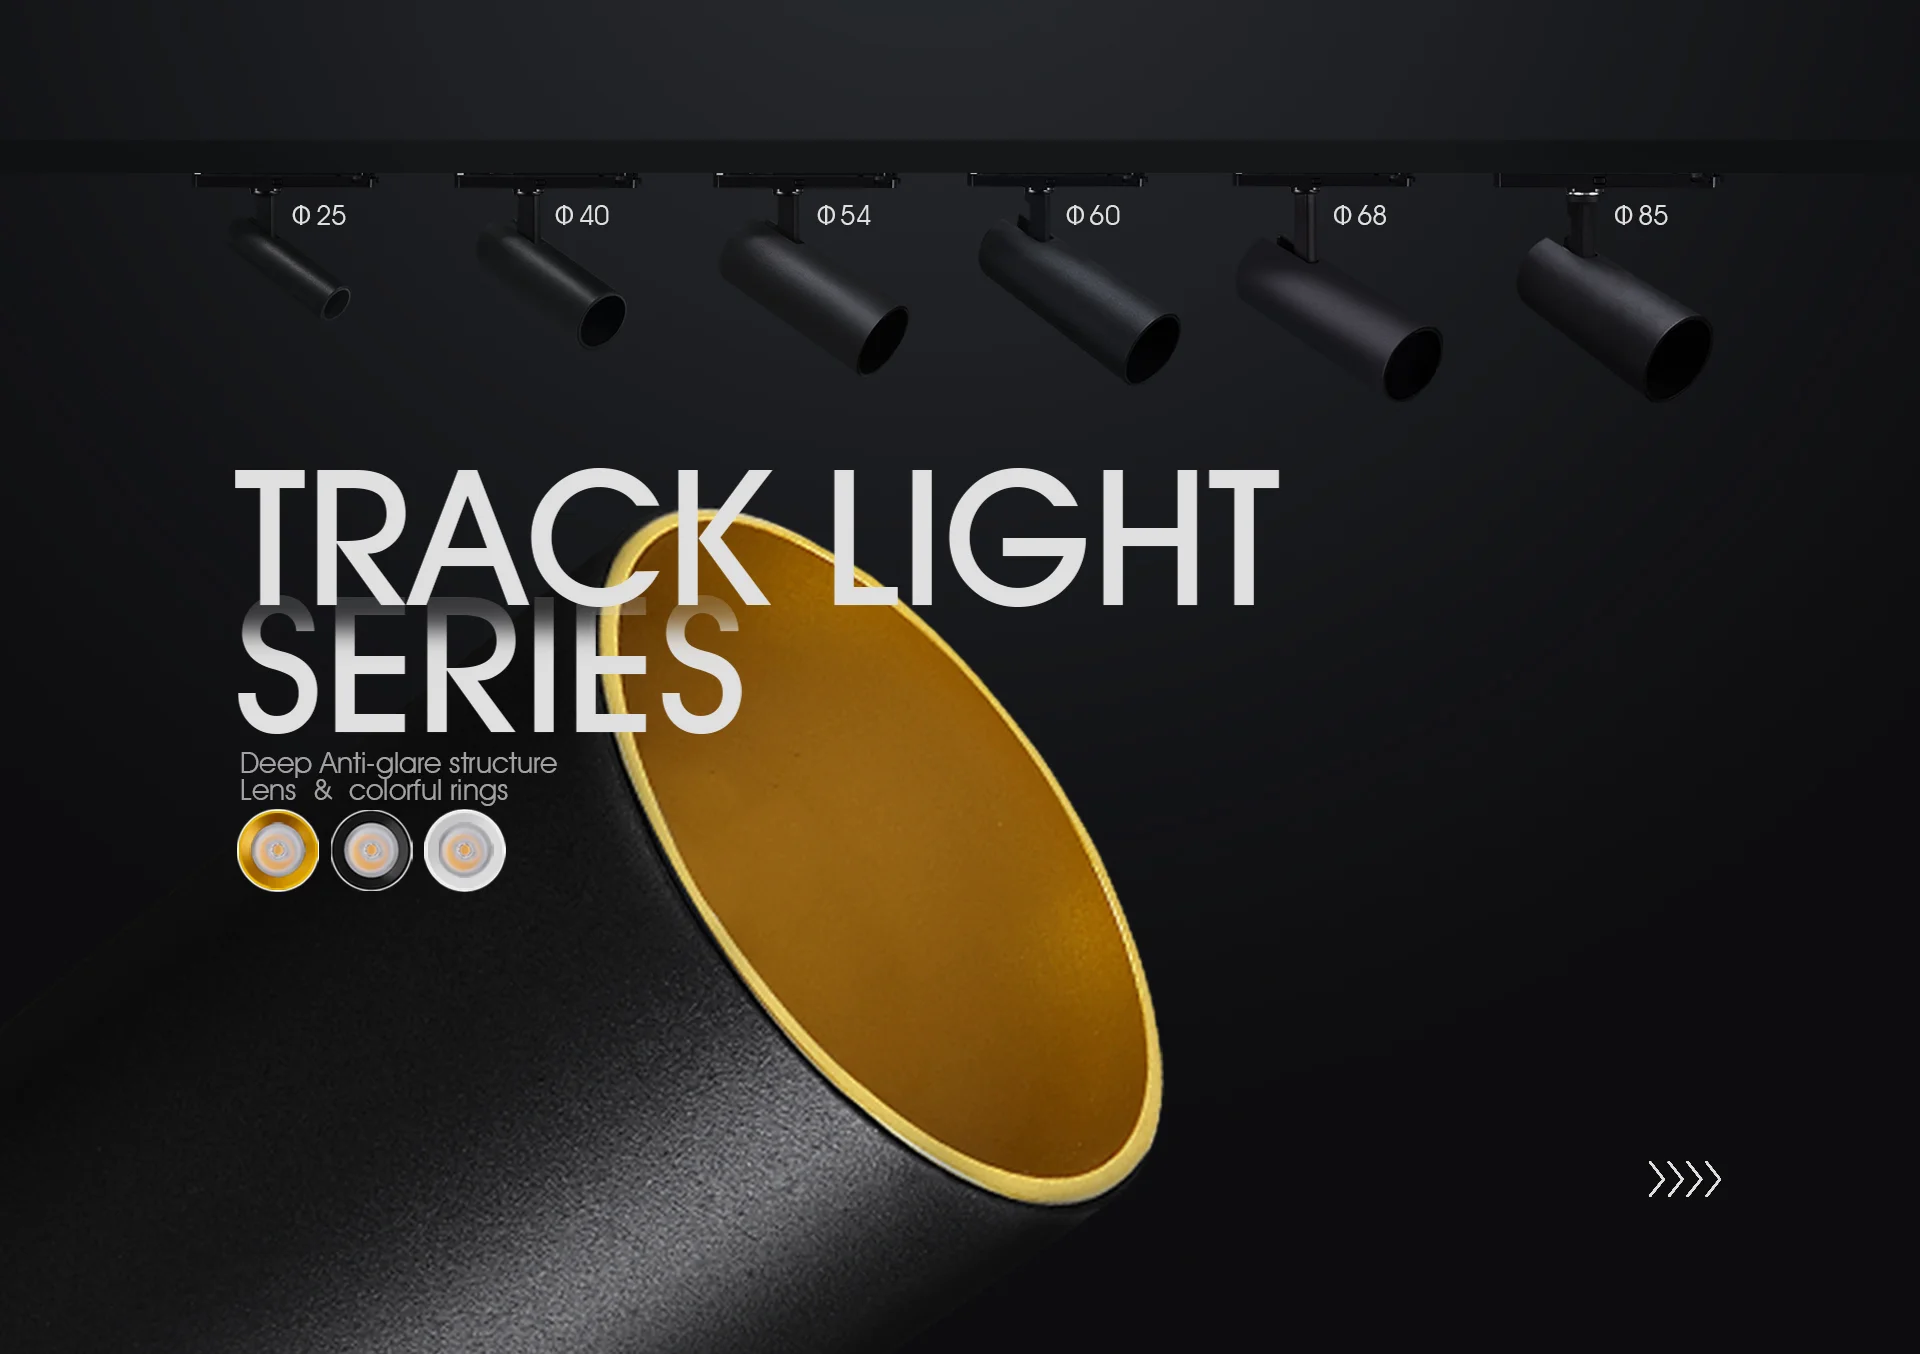 The quality of the track lights, take you to know the track lights